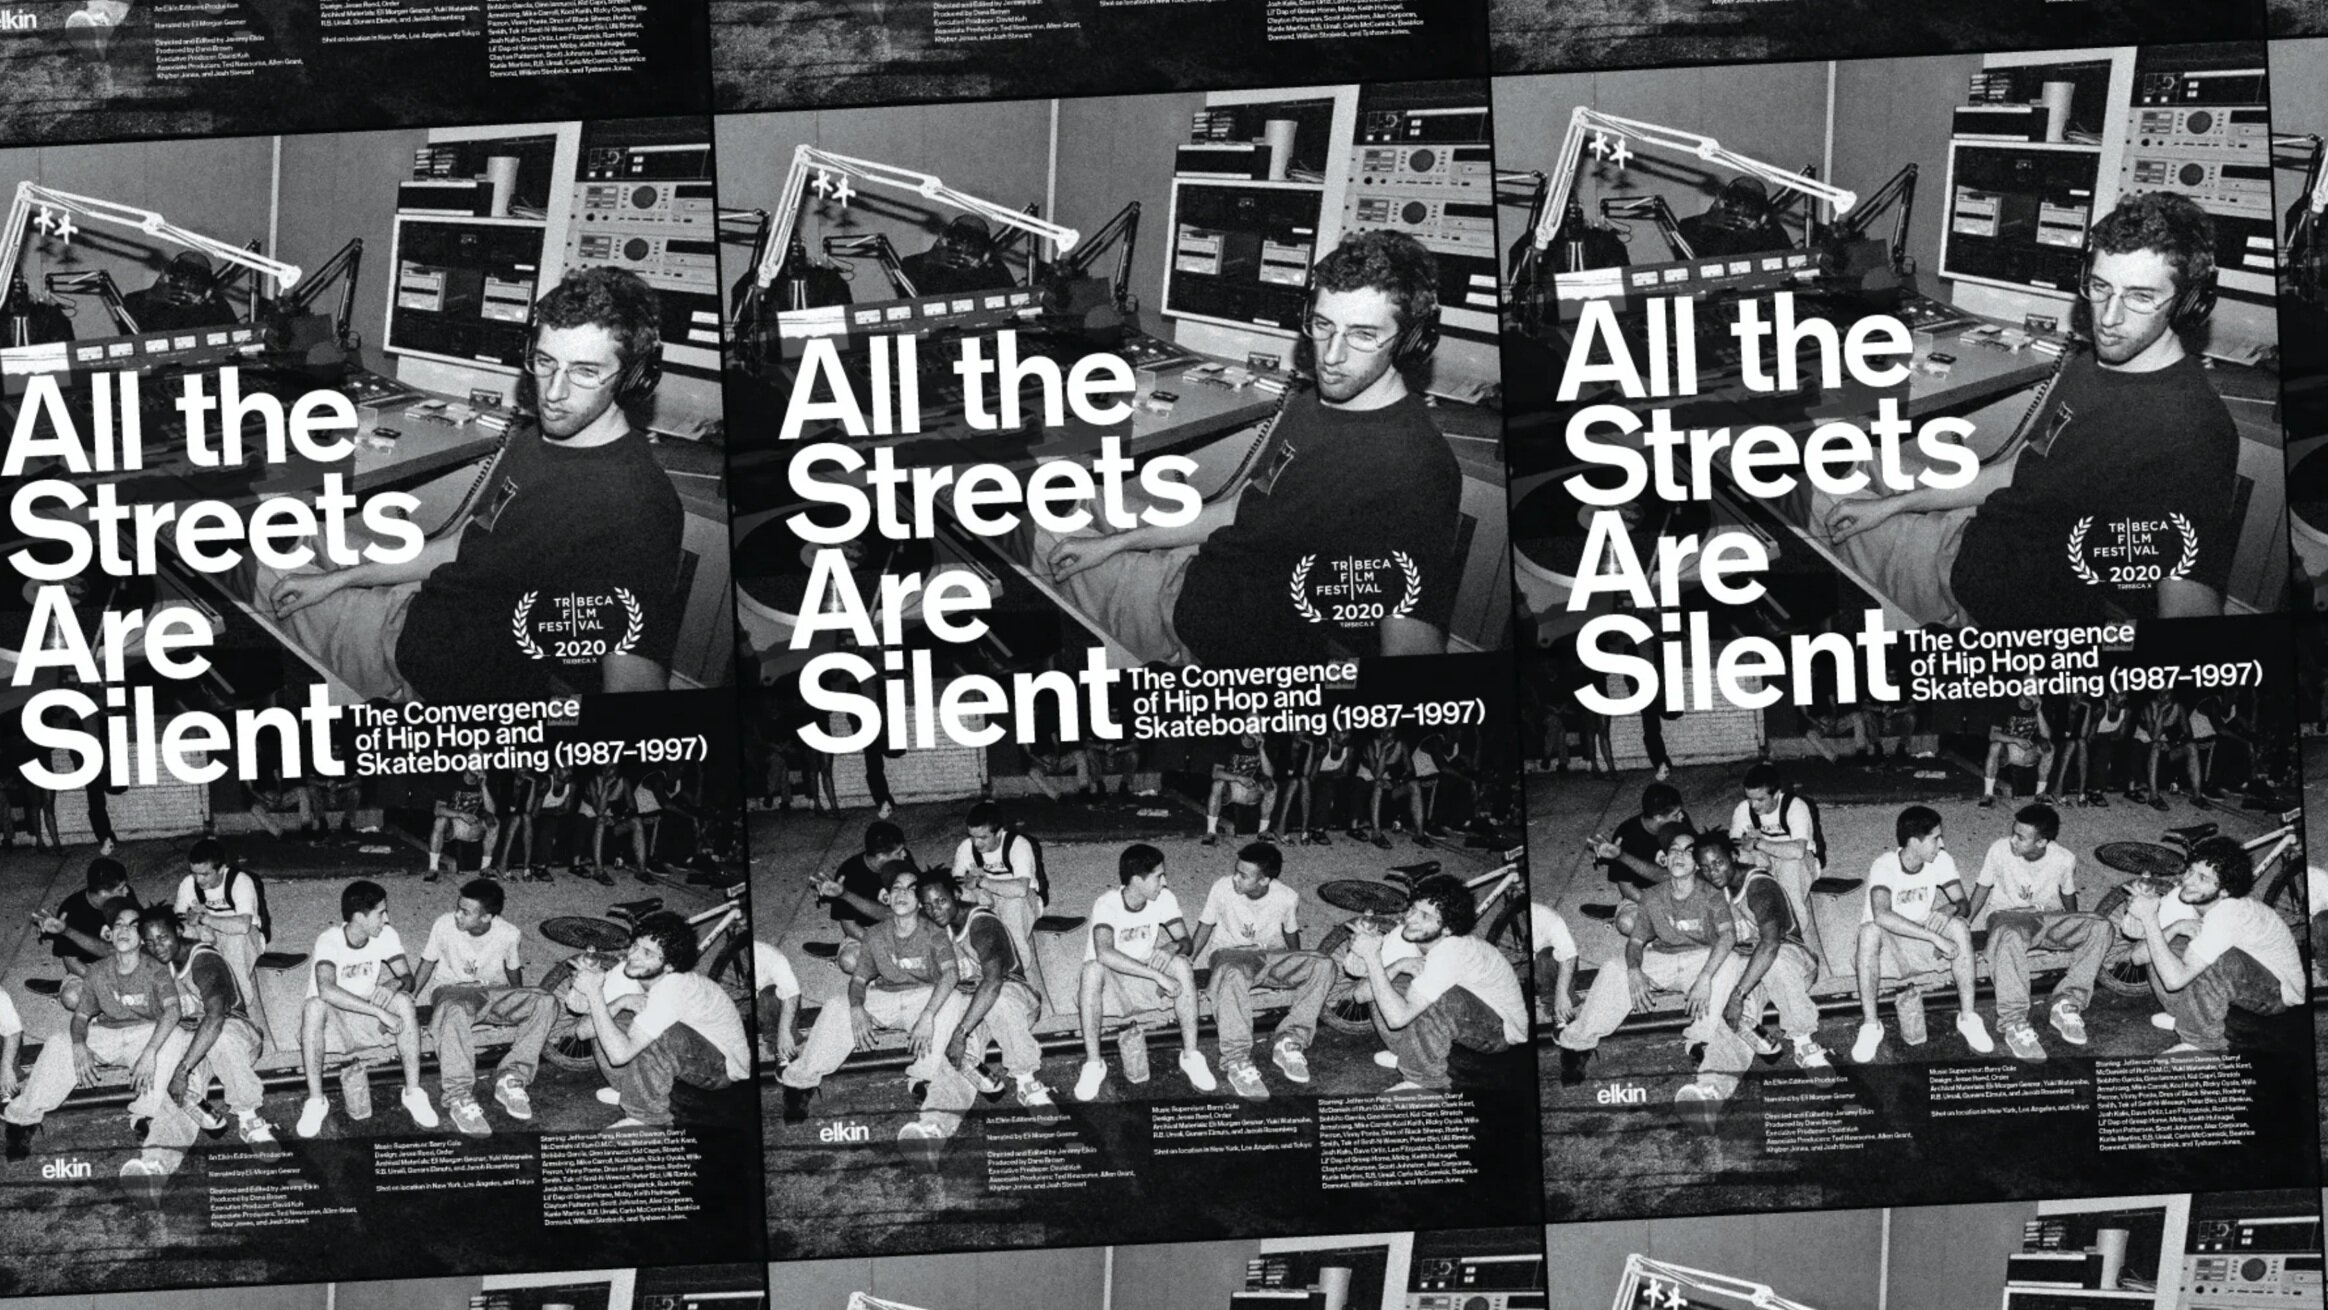 [fade]ALL THE STREETS ARE SILENT&lt;strong&gt;ELKIN EDITIONS&lt;/strong&gt;[/fade]